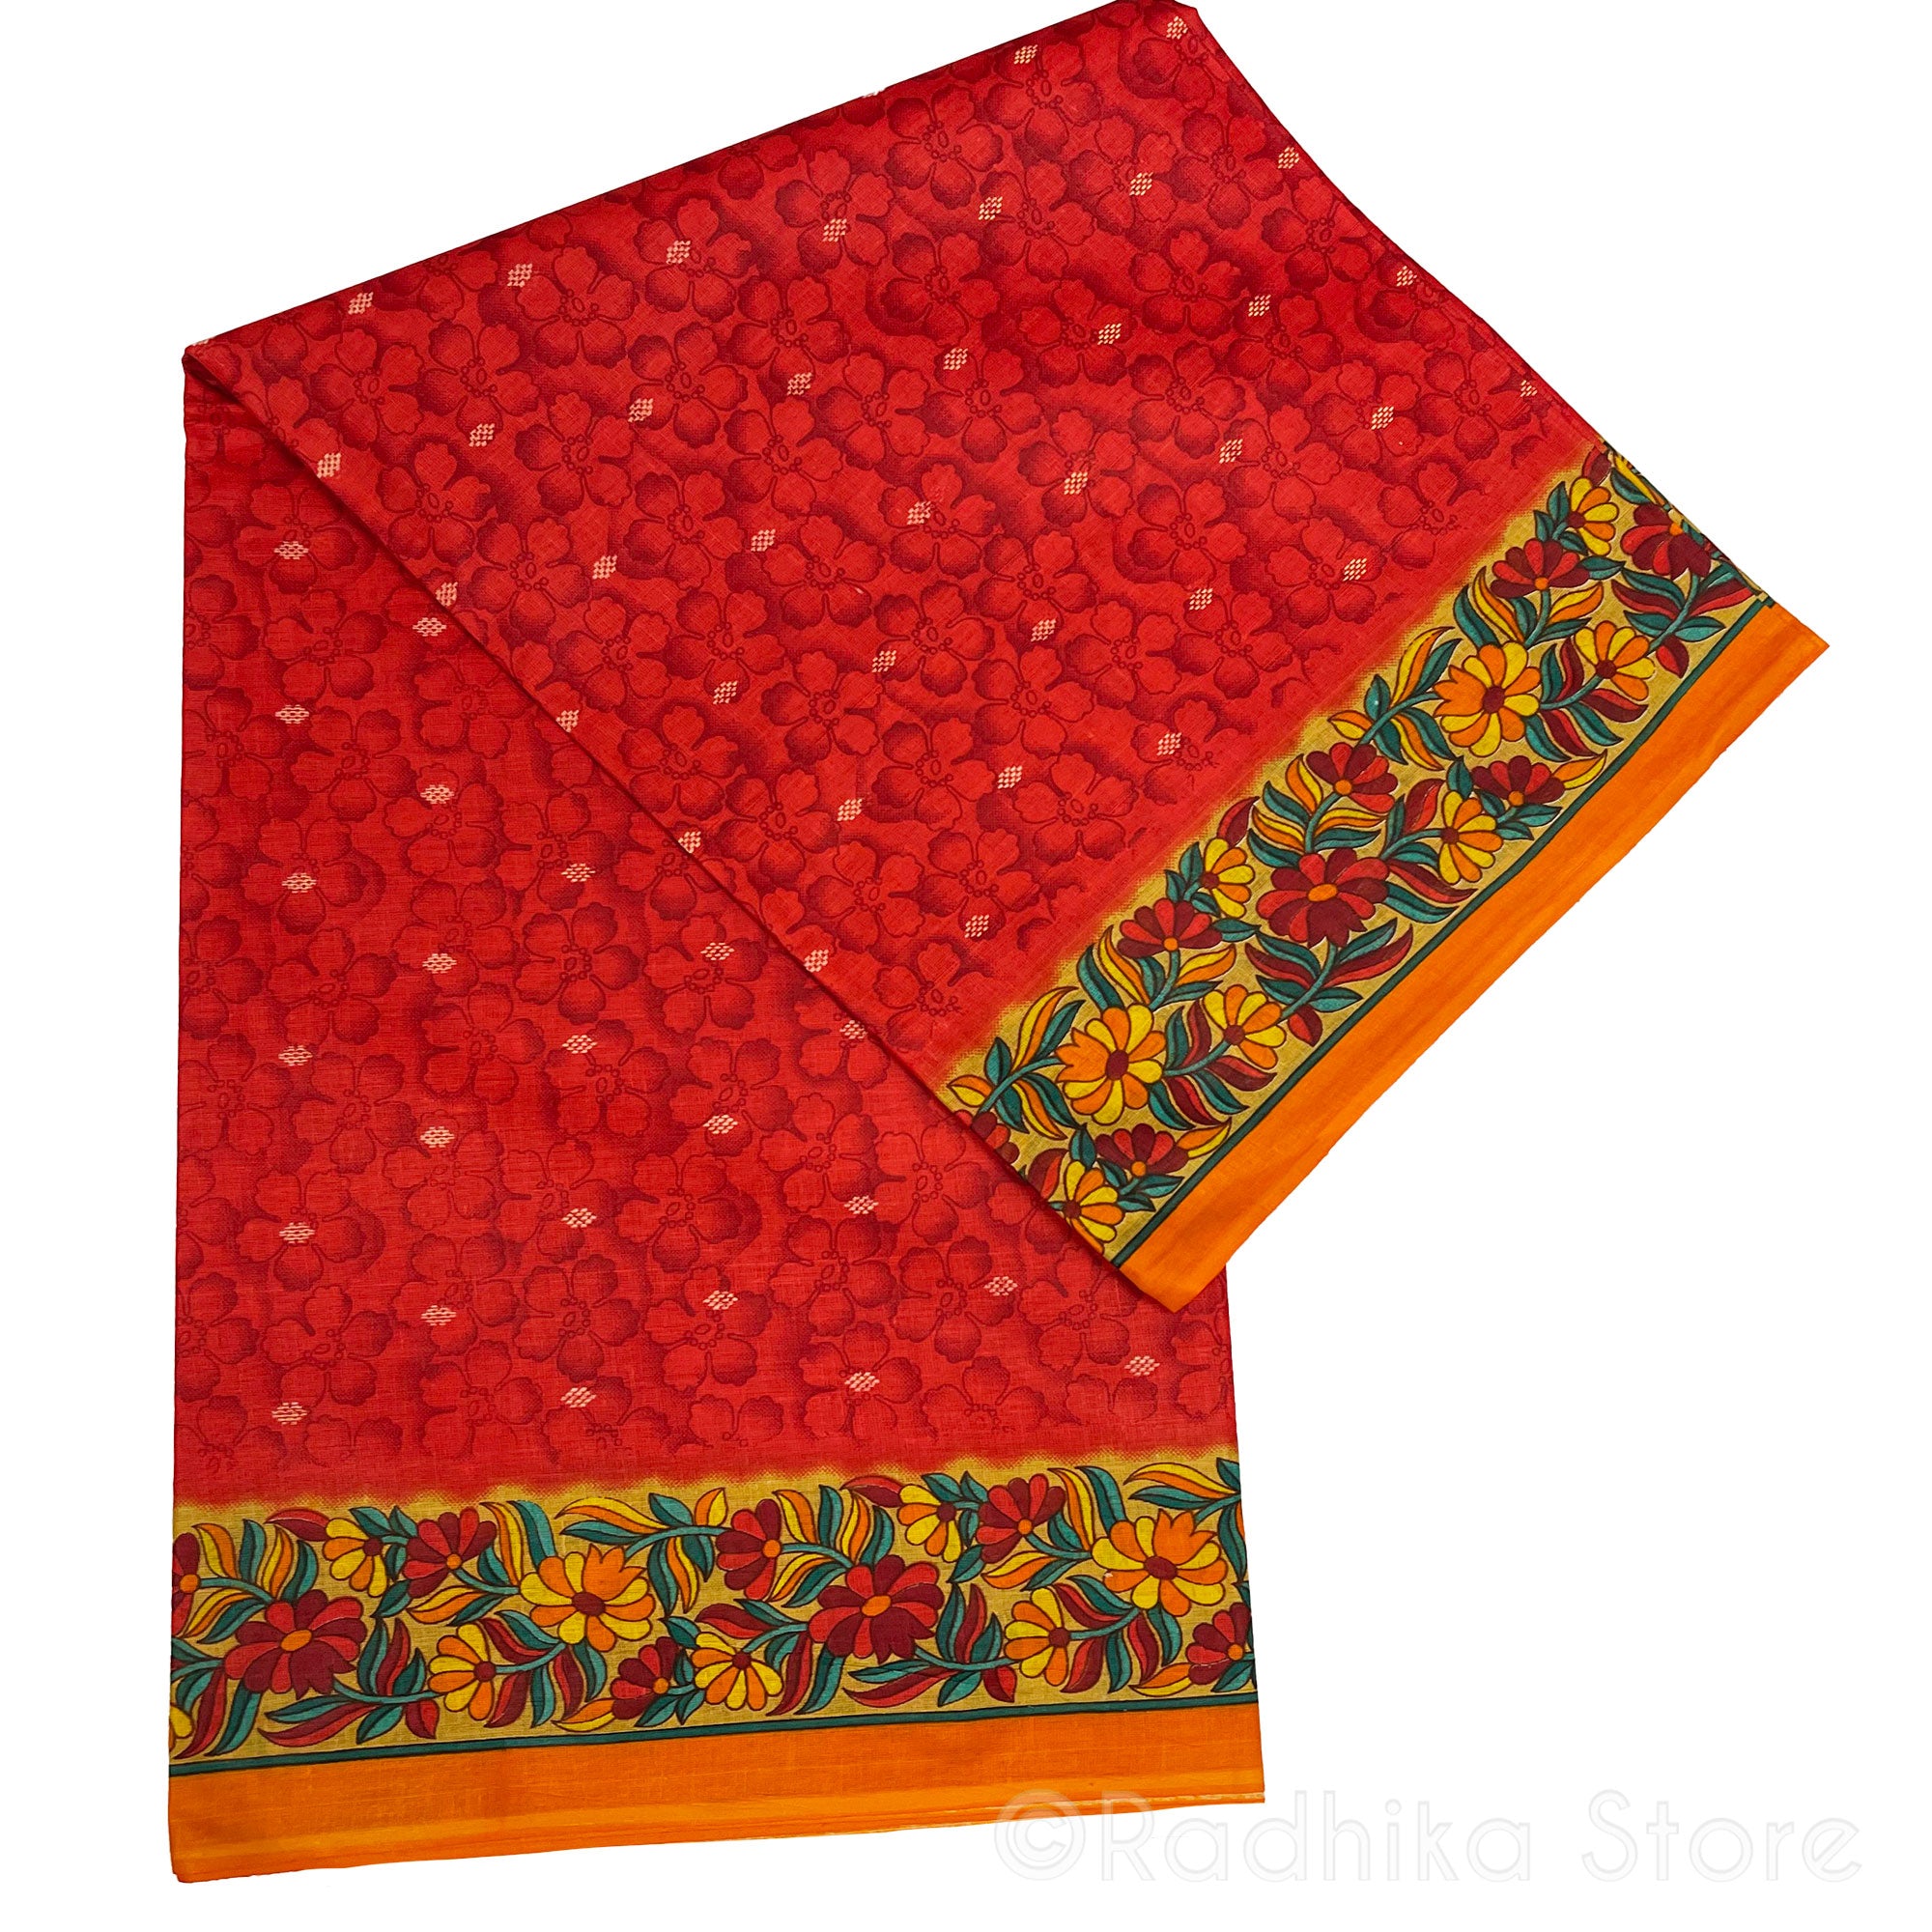 Mayapur Festival of Flowers - Printed Cotton Saree - Red With Marigold Colors